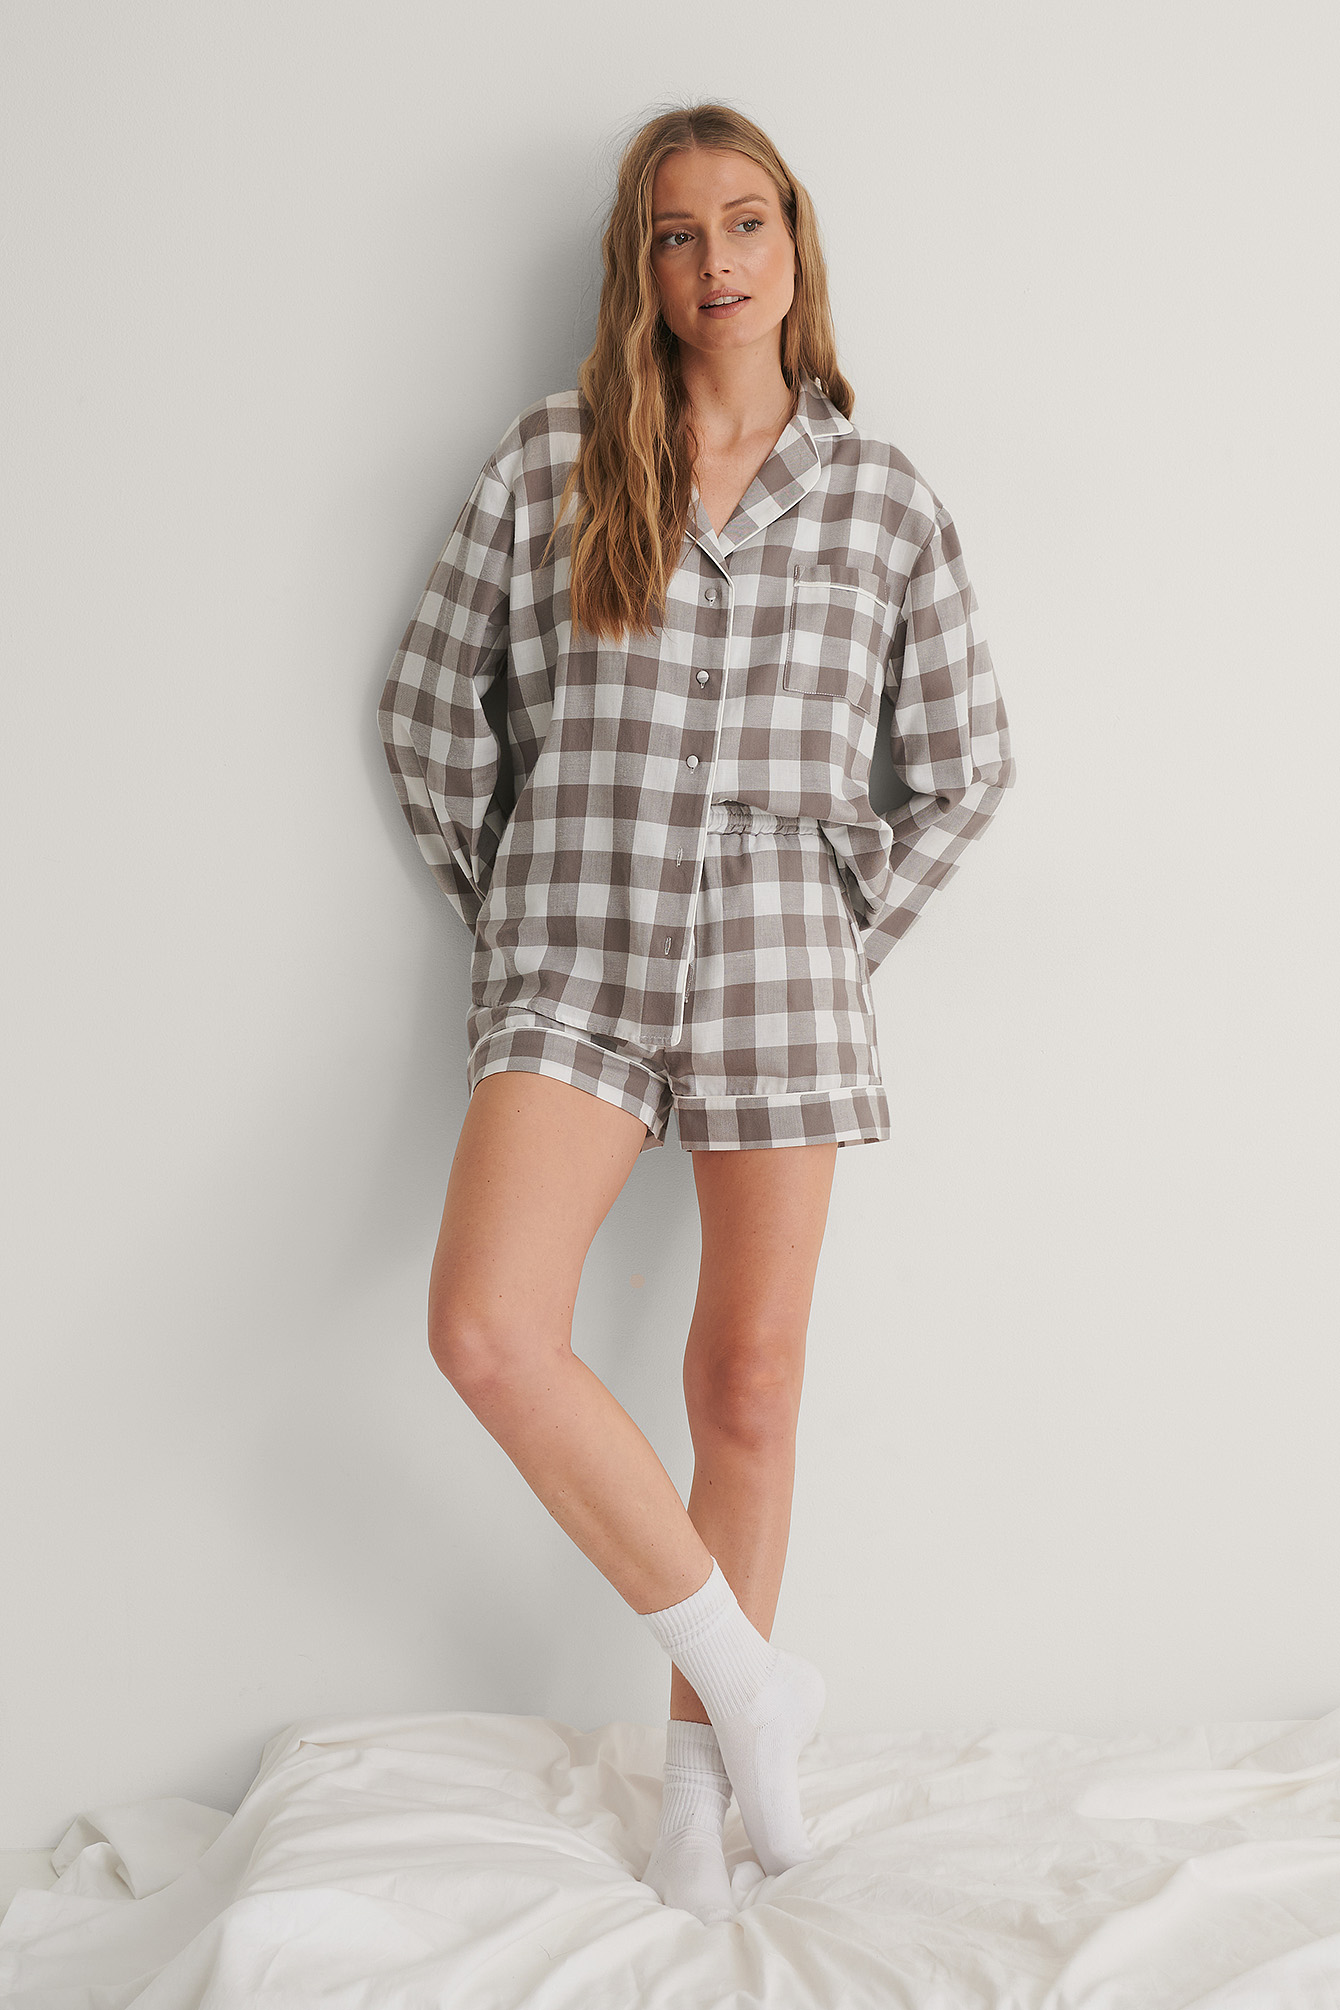 Flannel Pyjamas Shorts Outfit.